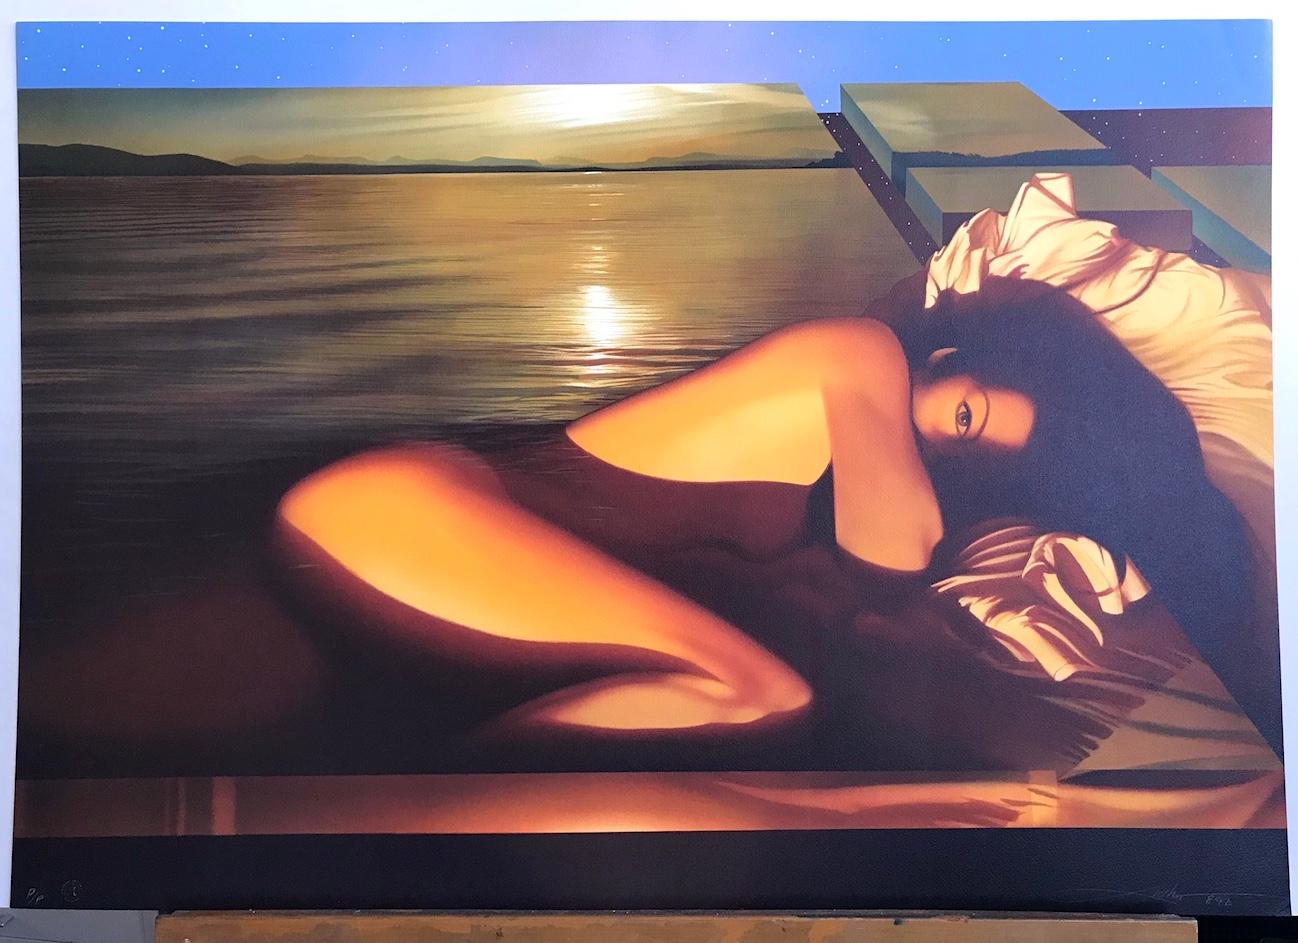 SPELLBOUND Signed Lithograph, Reclining Nude Woman, Golden Sunset, Erotic Art - Contemporary Print by Frank Licsko